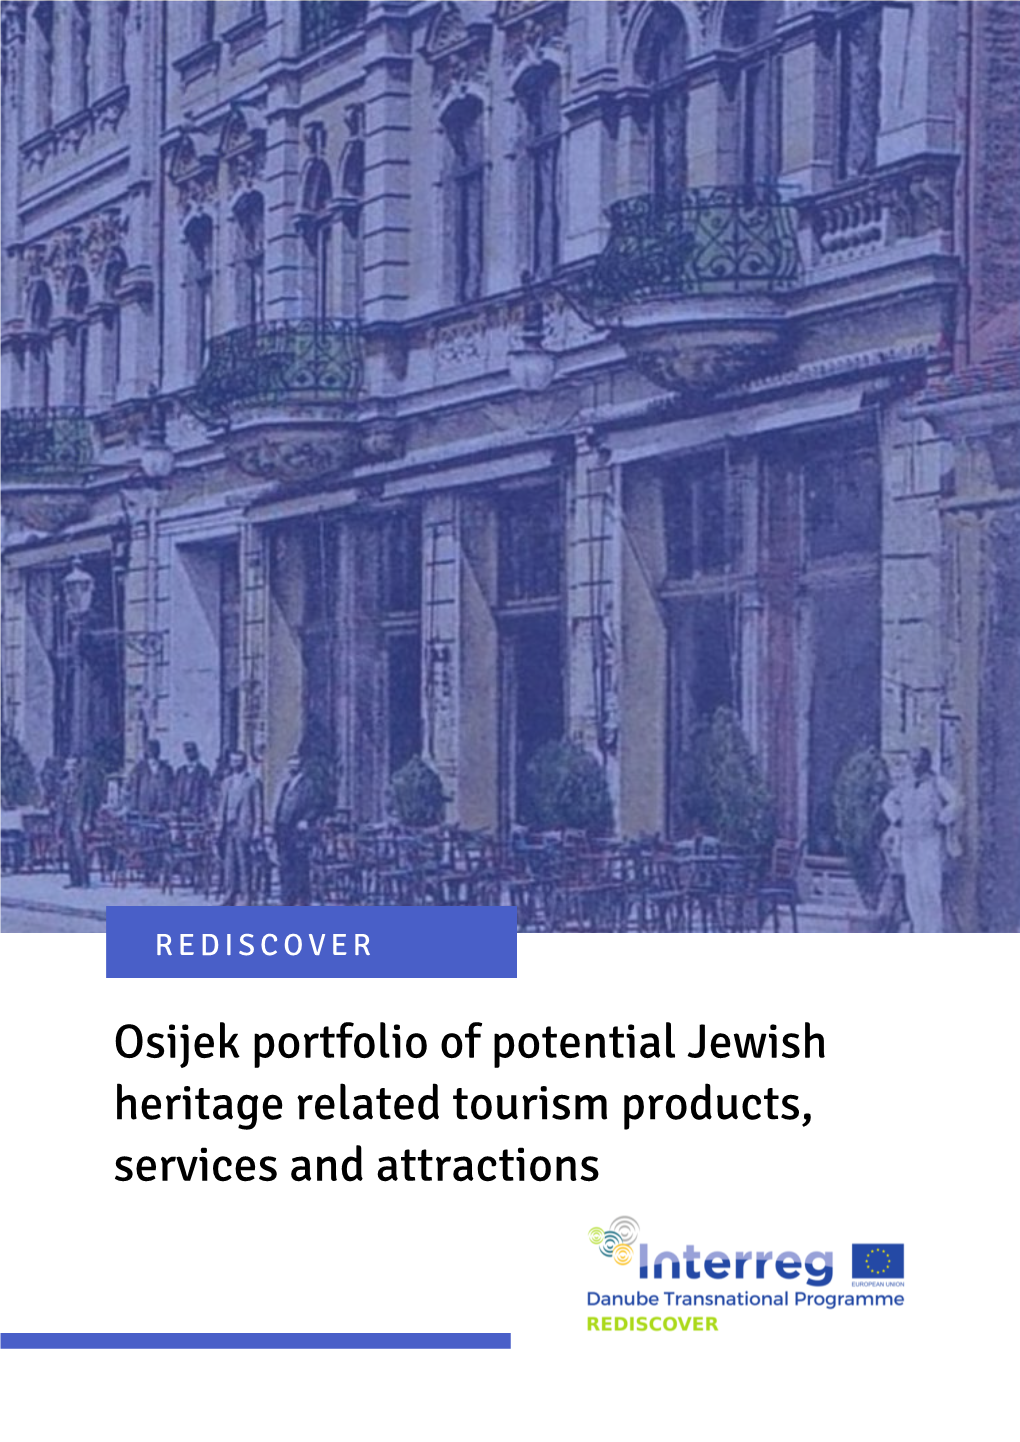 Osijek Portfolio of Potential Jewish Heritage Related Tourism Products, Services and Attractions